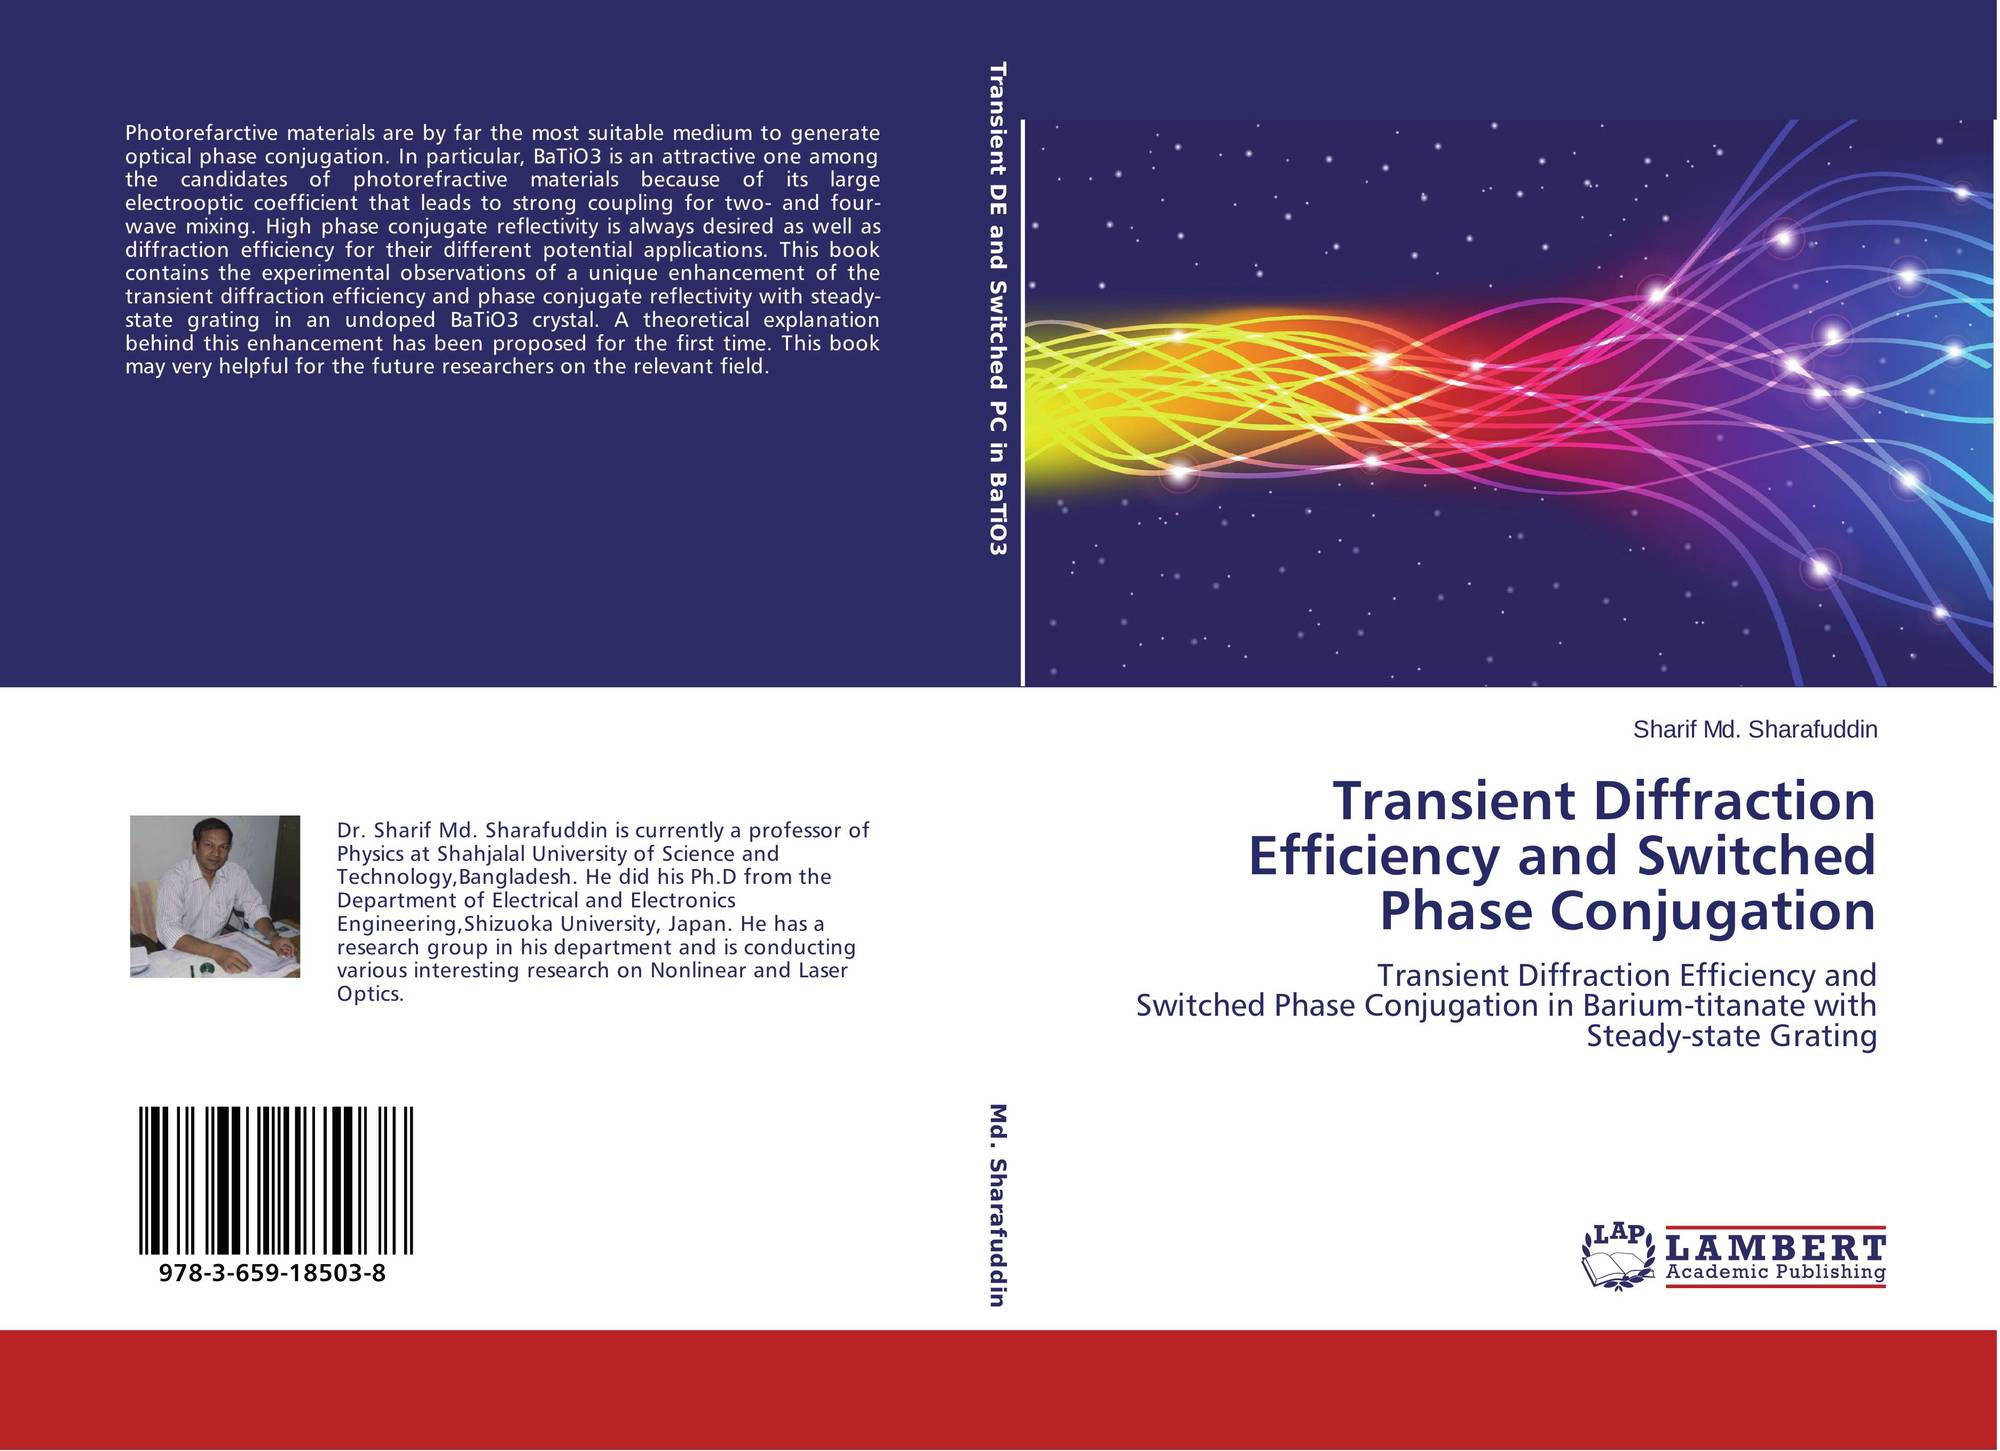 Effect quality. Transient обложка. Laser Tissue interaction. Physics of Solitons. Laser photoacoustic Complex.